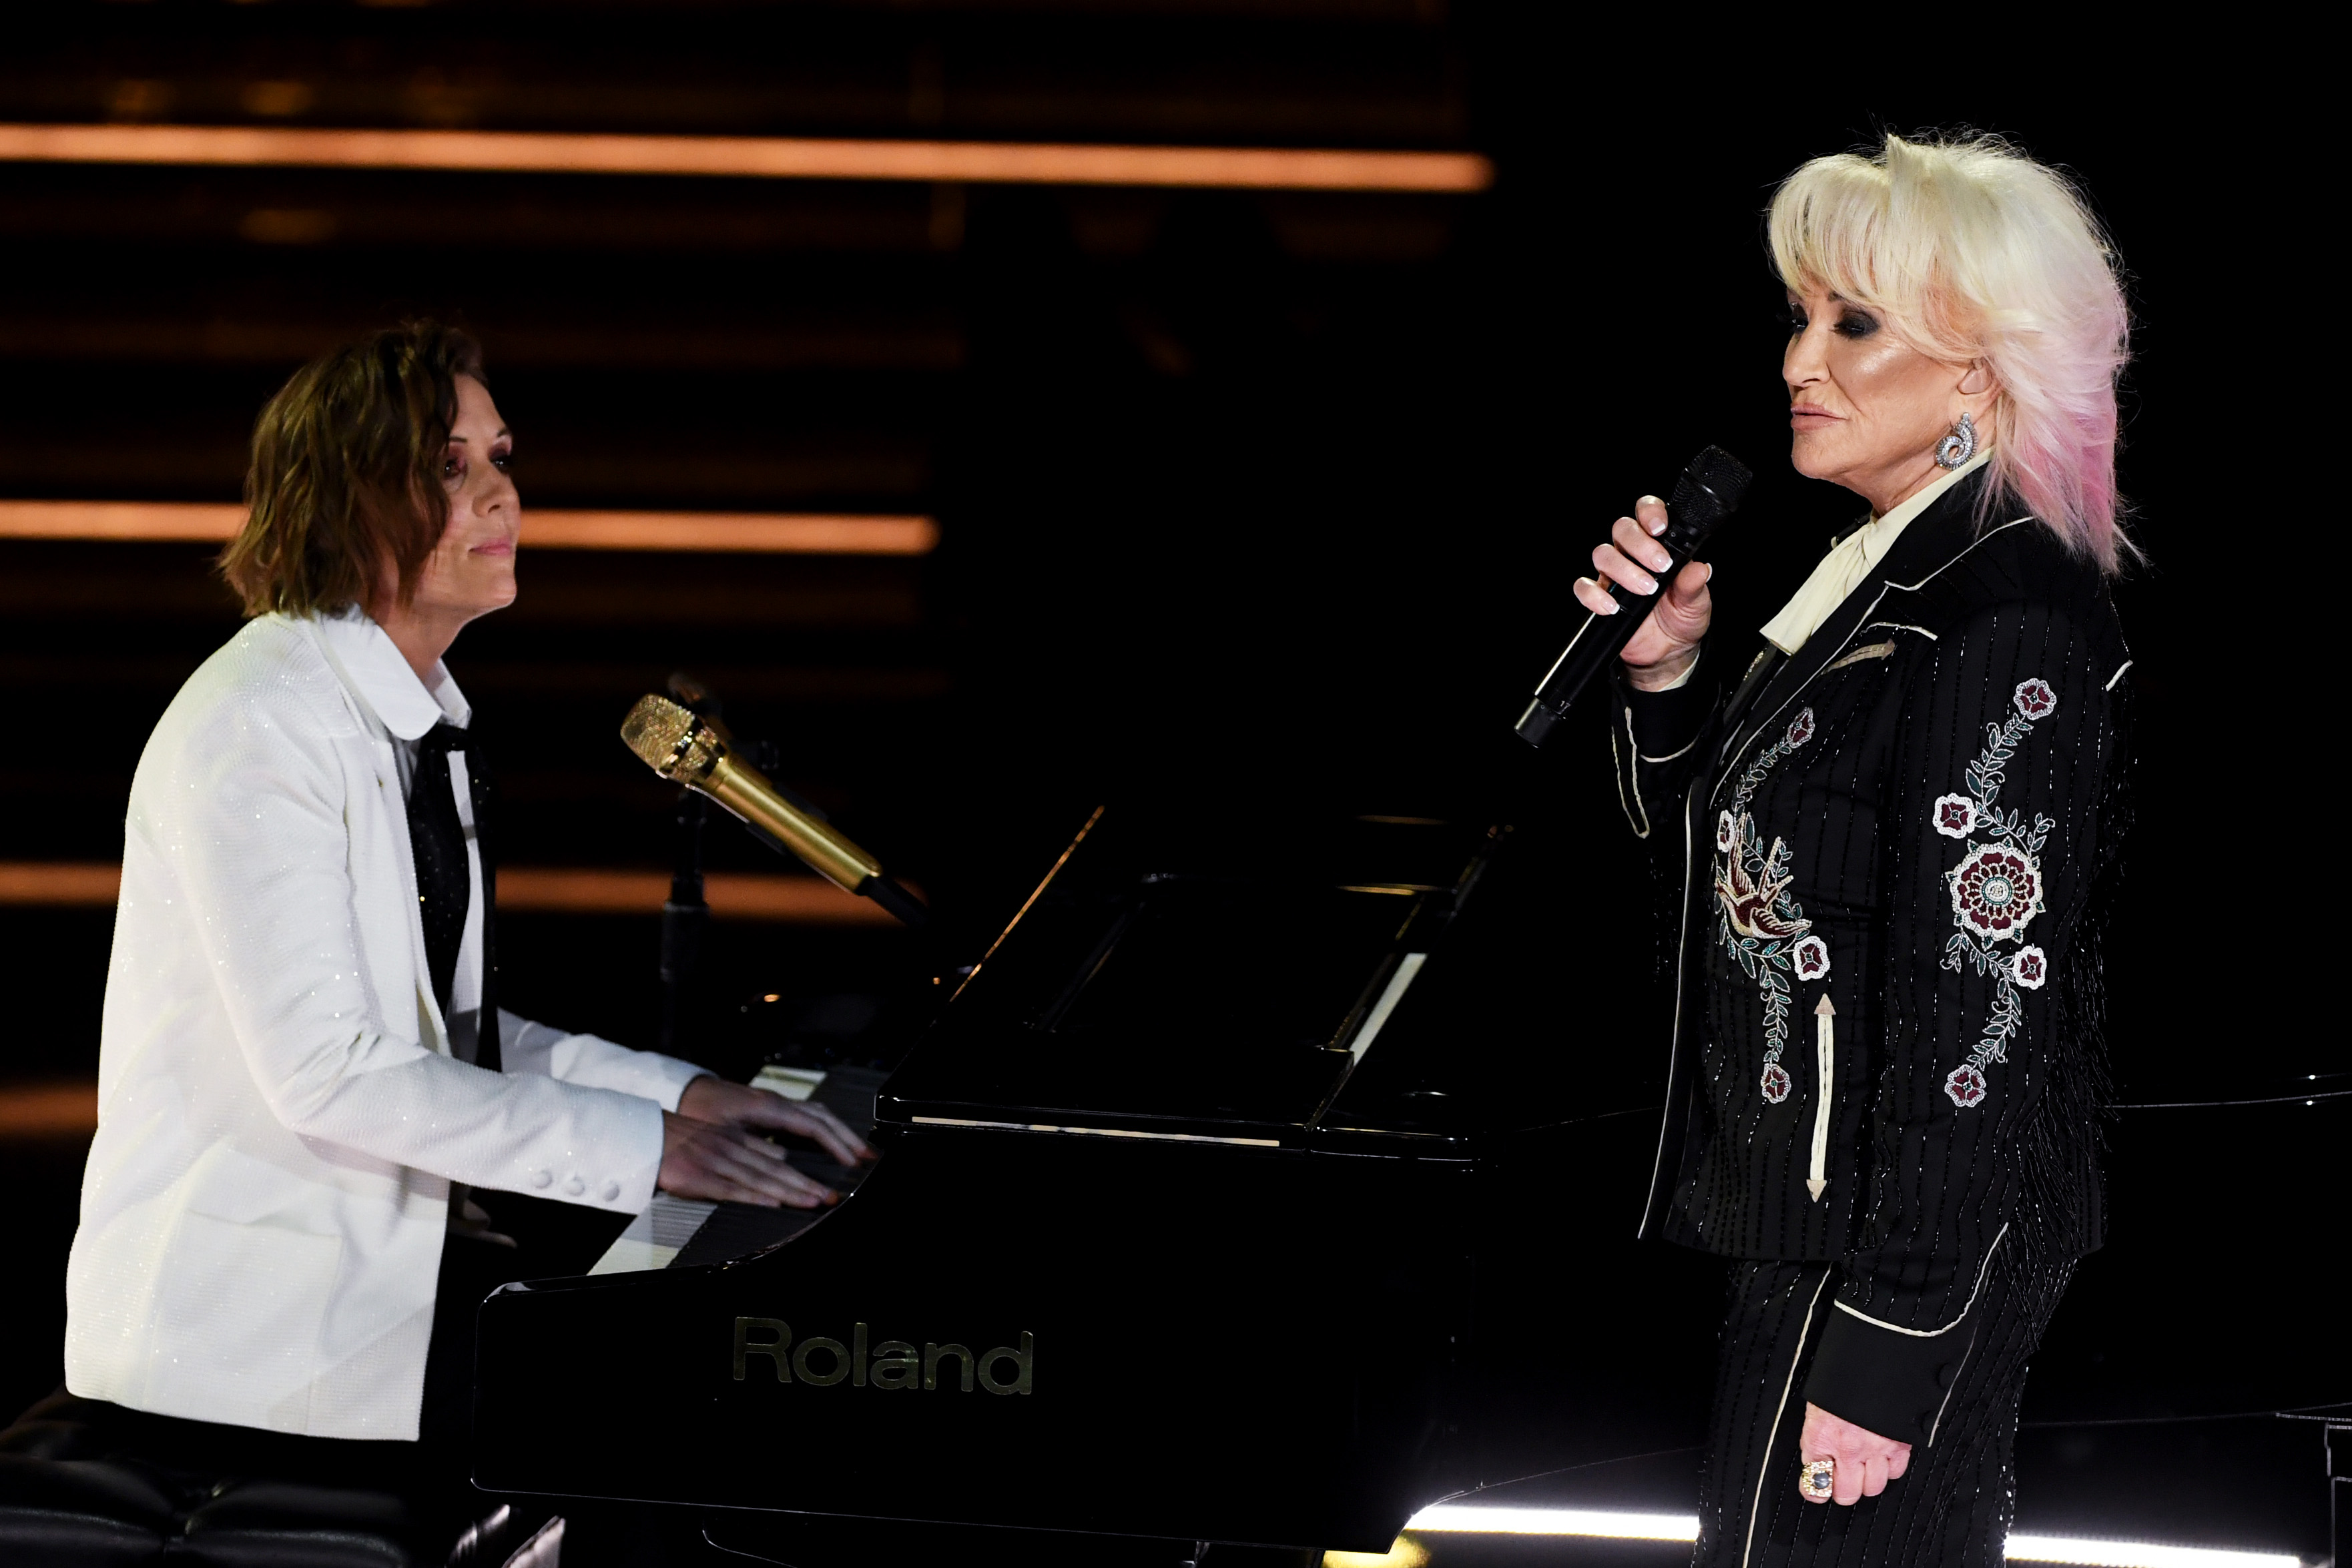 Brandi Carlile and Tanya Tucker perform onstage during the 62nd Annual GRAMMY Awards at STAPLES Center on January 26, 2020 in Los Angeles, California. (Getty Images for The Recording A—2020 The Recording Academy)